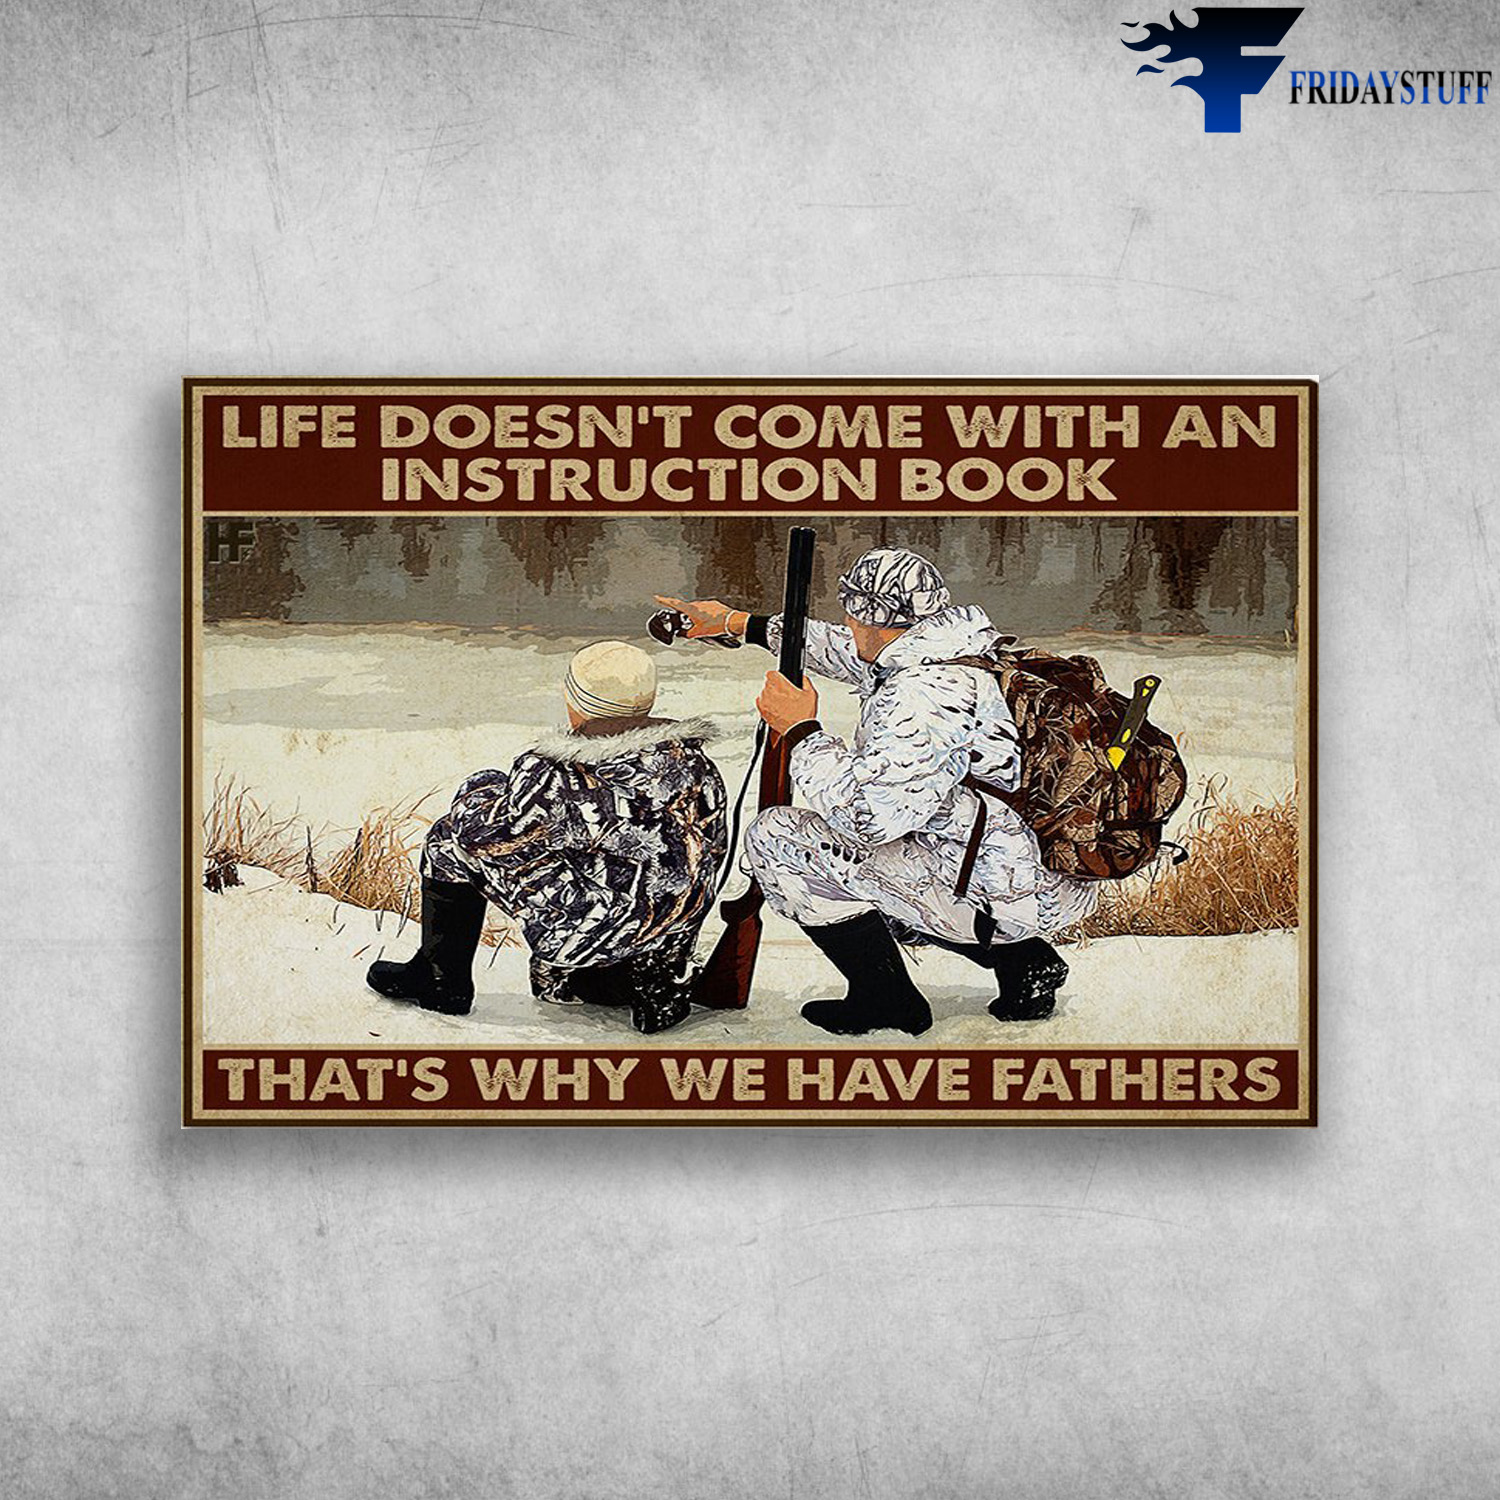 Hunting Man Under The Snow - Life Doesn't Come With An Instruction Book, That's Why We Have Fathers